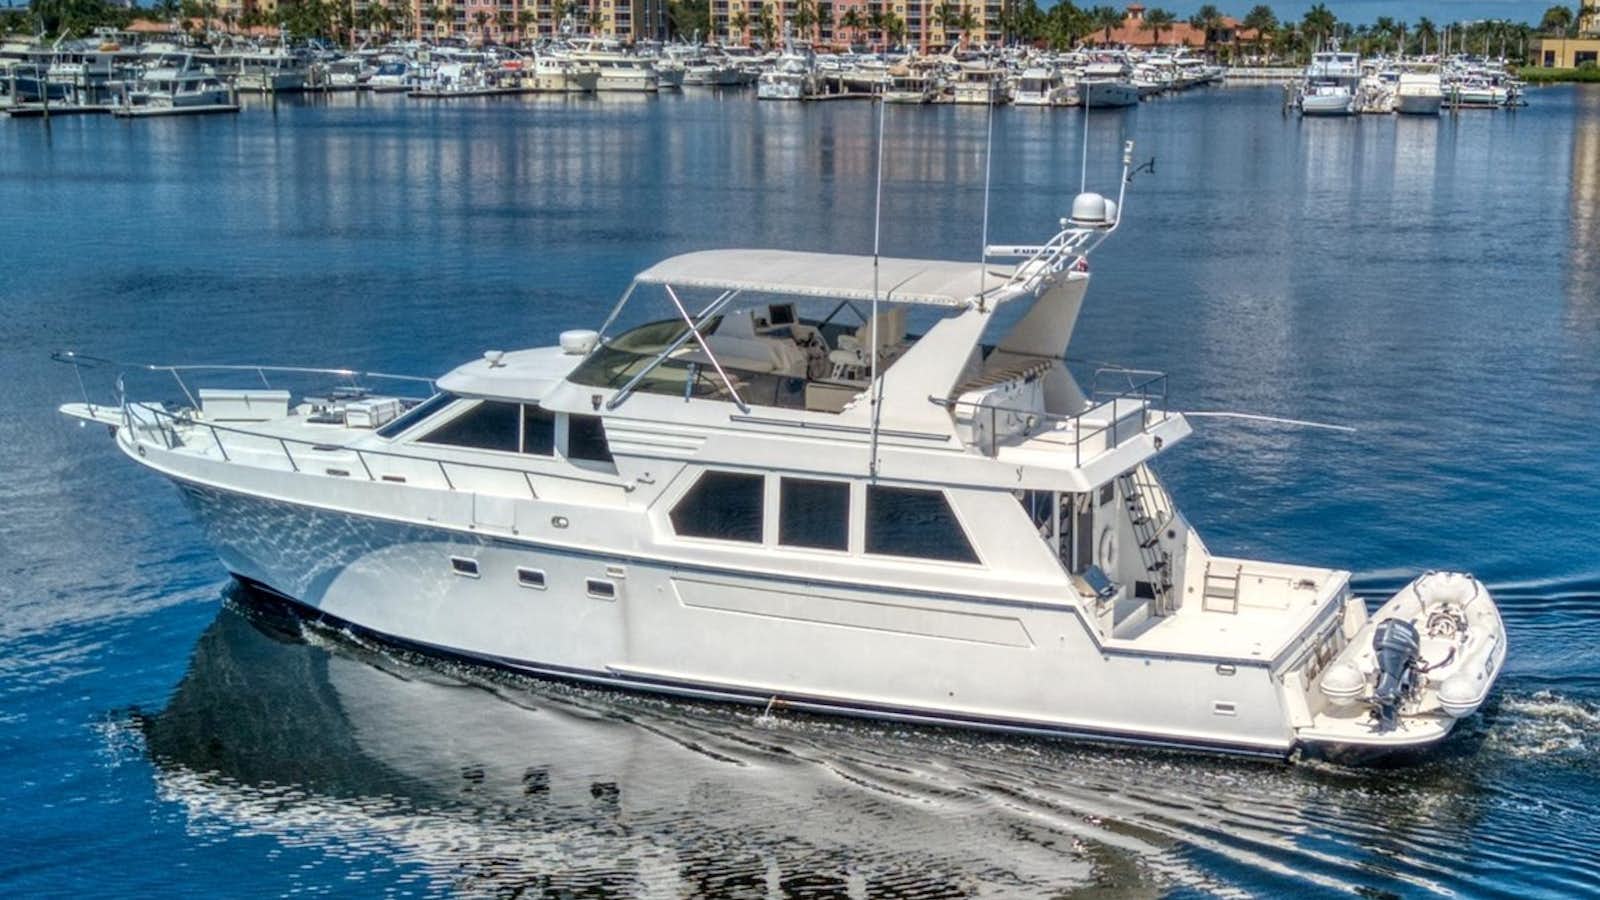 Just bearly iii
Yacht for Sale